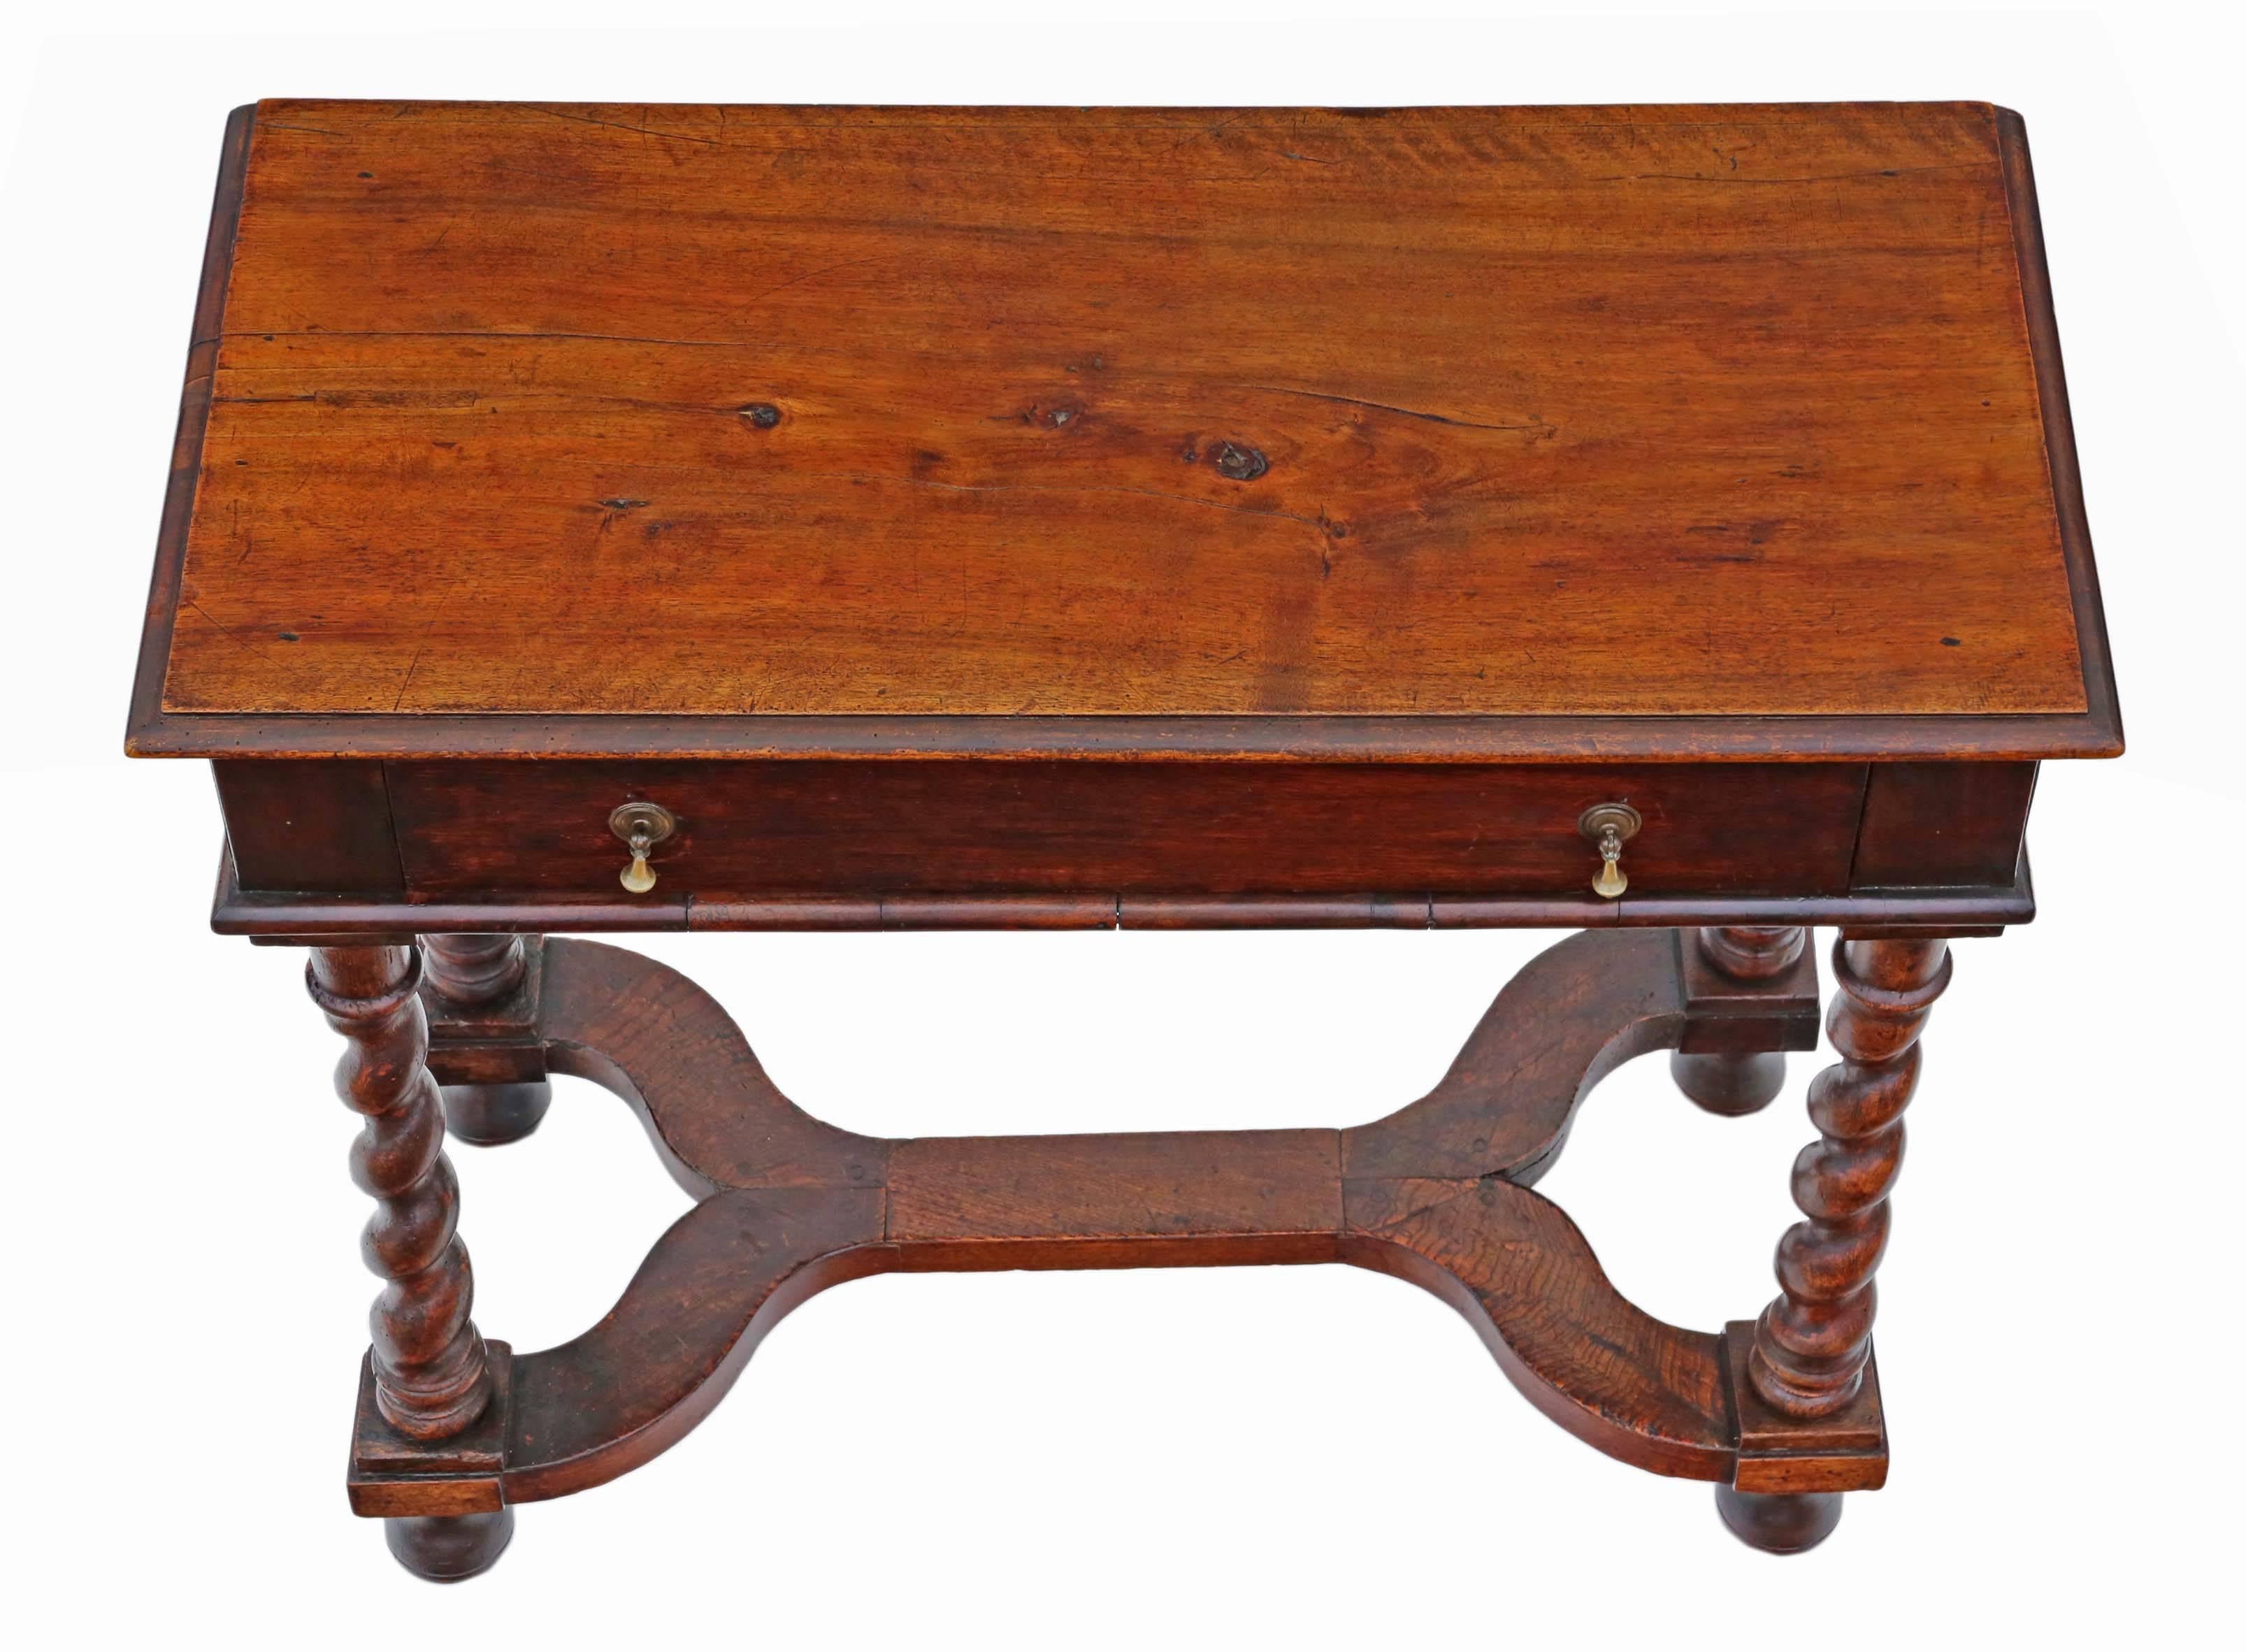 Antique Georgian walnut and fruitwood desk writing side table dating from circa 1780. A rare find, with a fantastic X stretcher base and twist legs.

No loose joints. Full of age, character and charm. The oak lined drawer slides freely.

Would